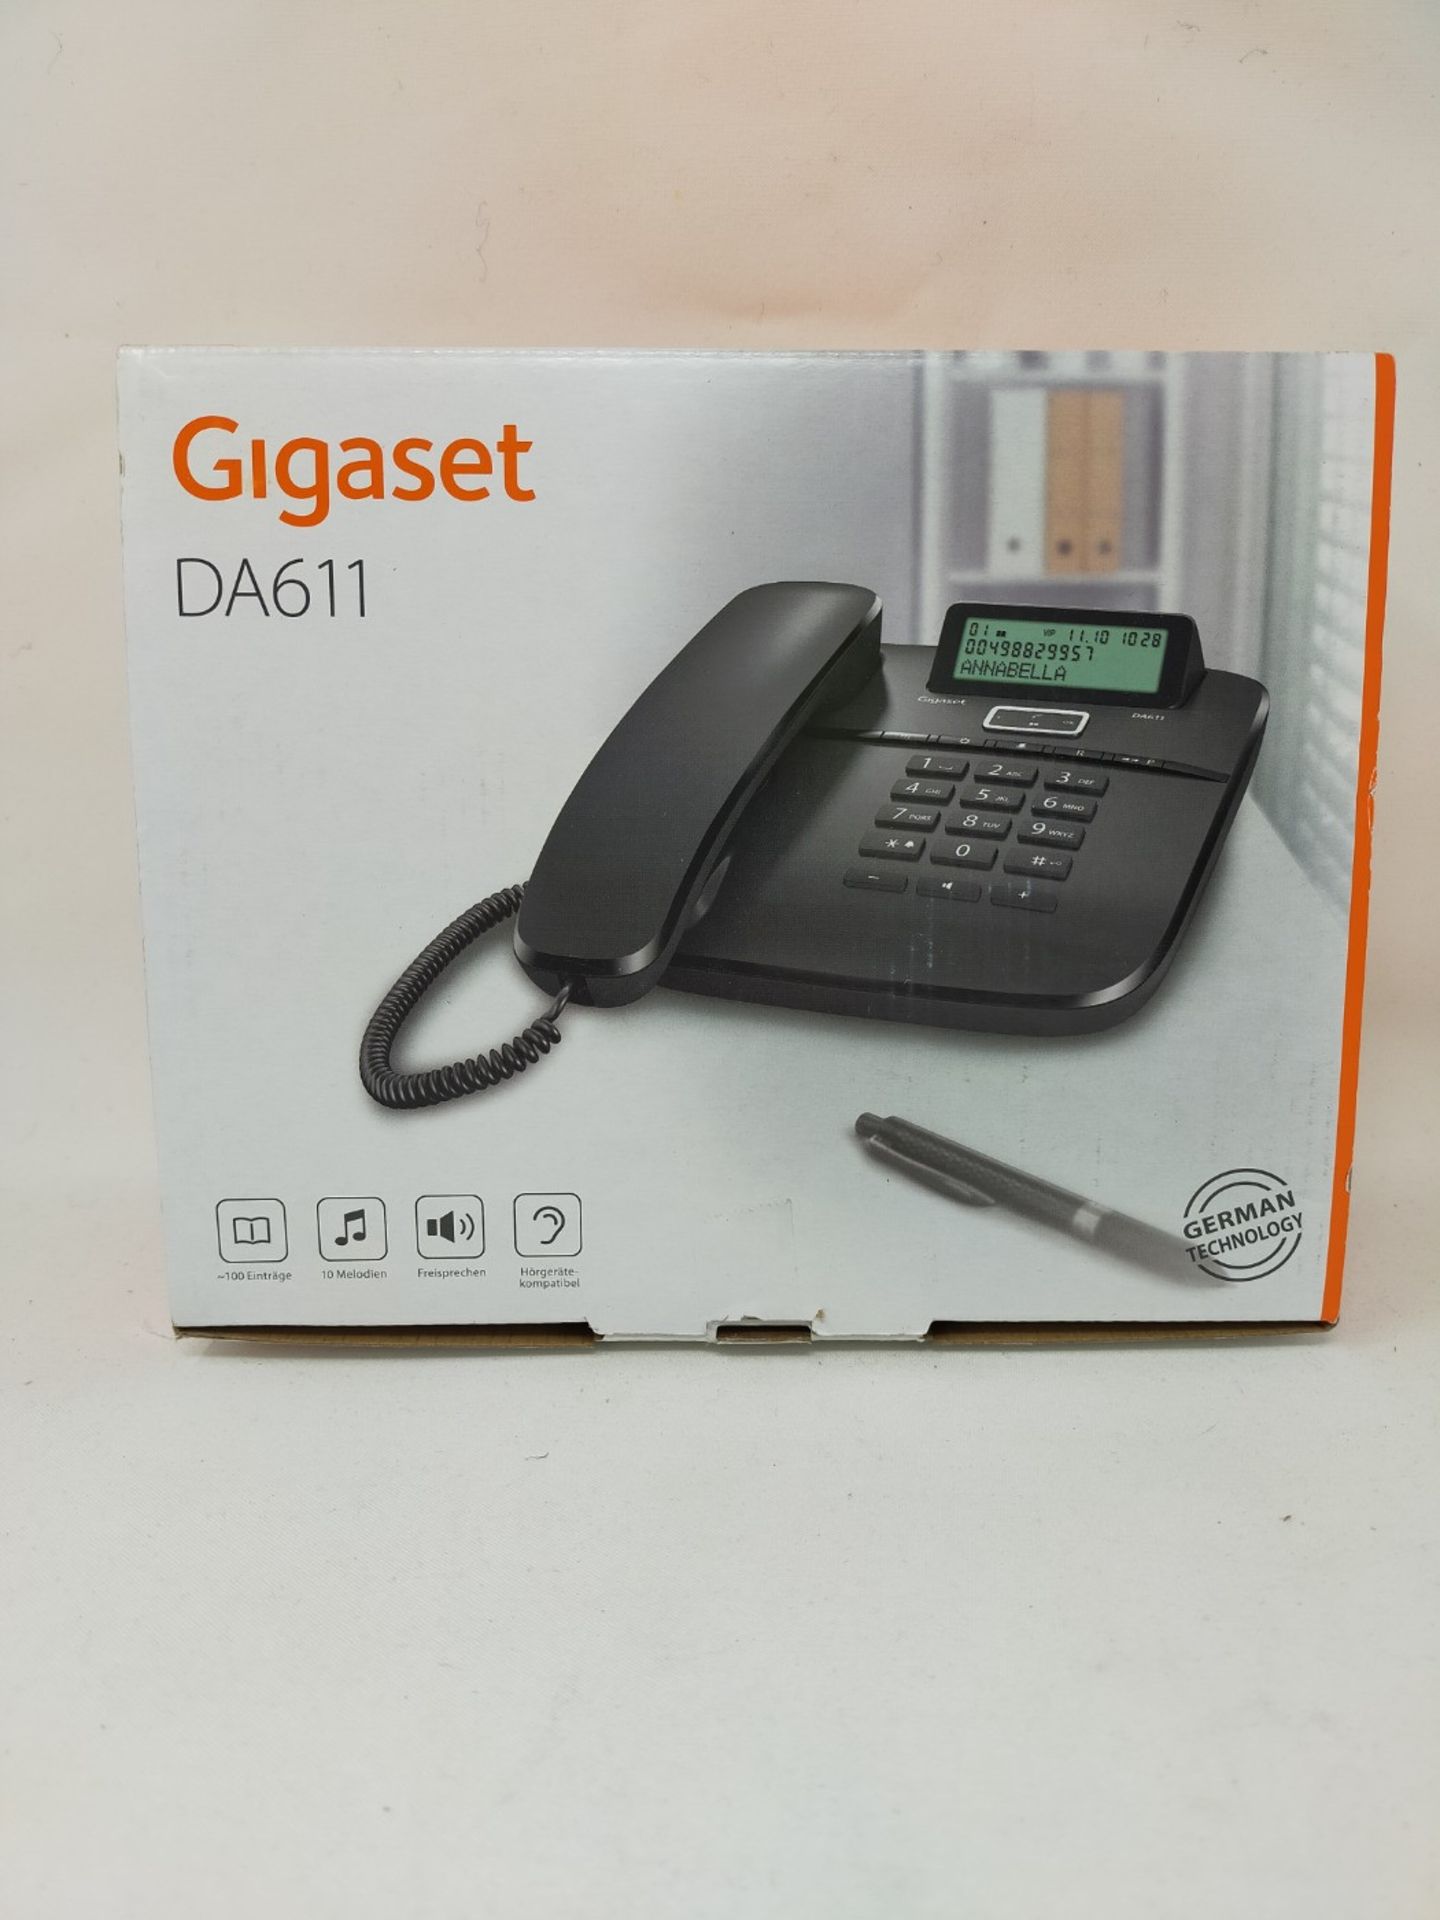 Gigaset DA611 - Corded telephone with hands-free function - Phone book with VIP markin - Image 2 of 3